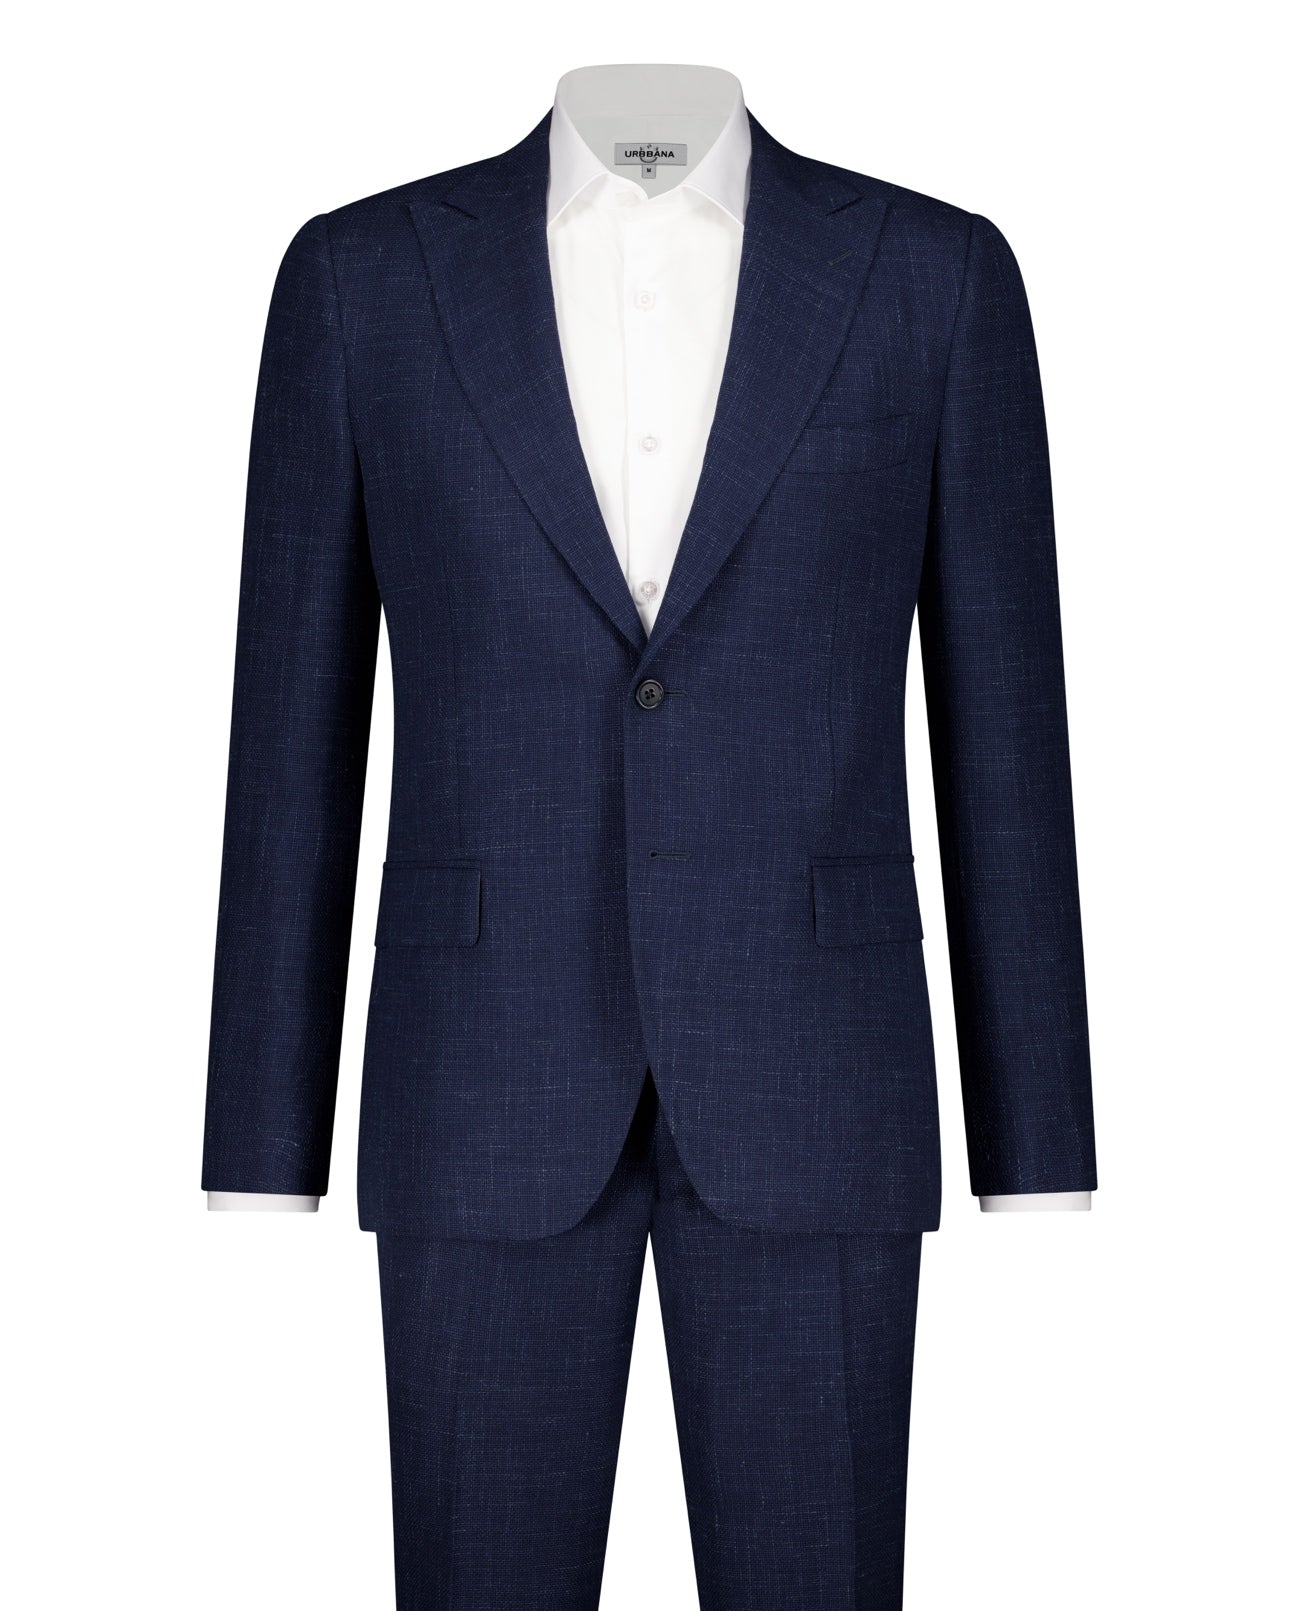 Marcus Loro Piana Linen Cloth Suit - Navy Check - Made In Italy